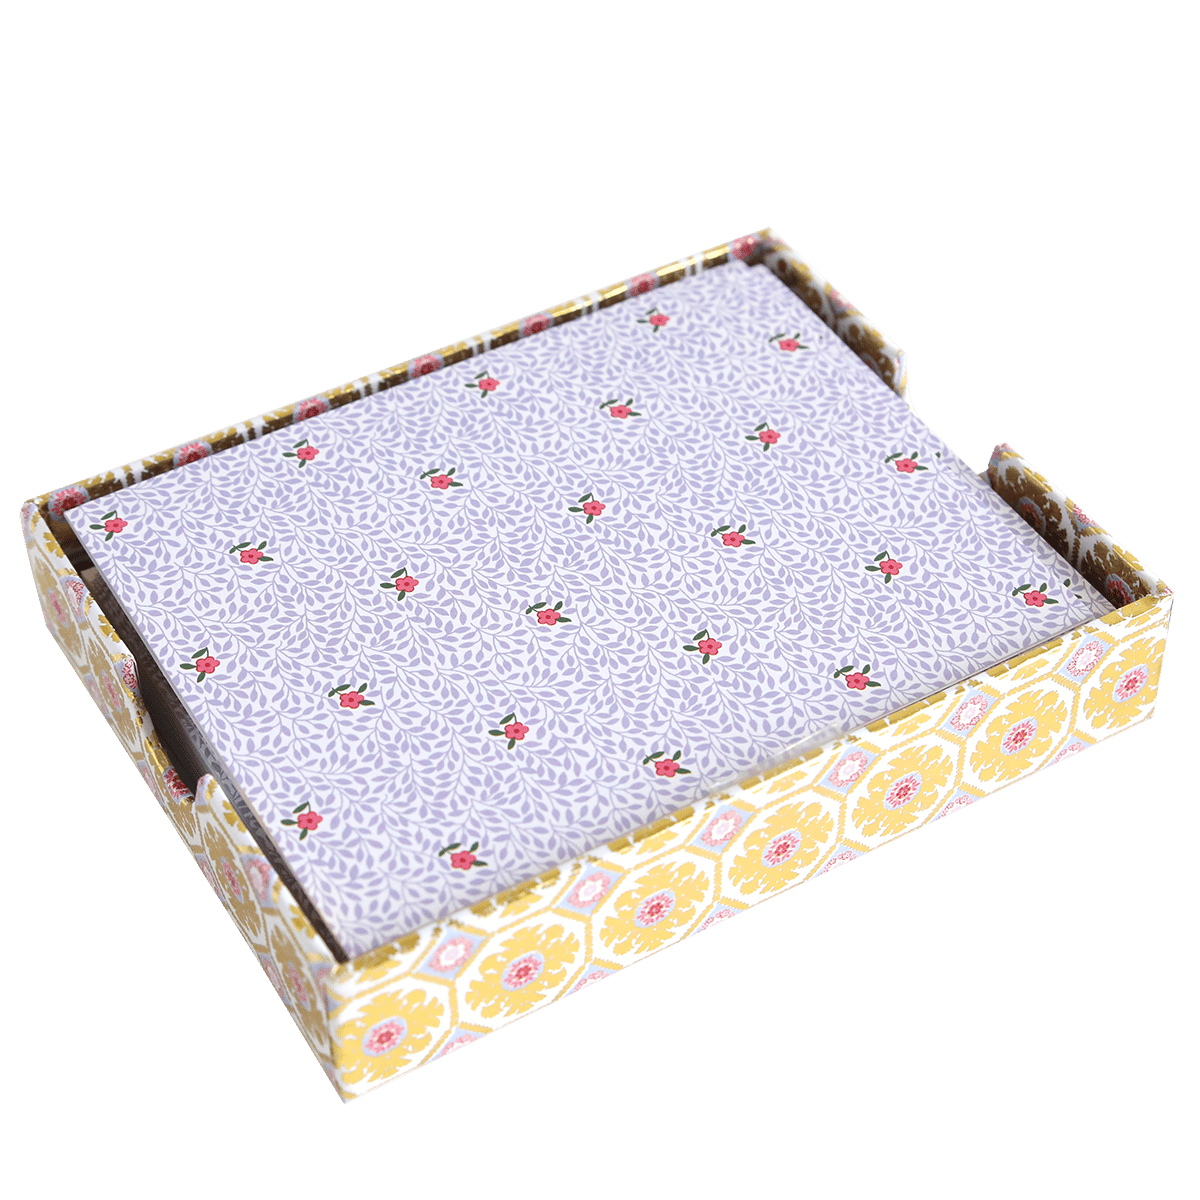 a yellow and white box with flowers on it.